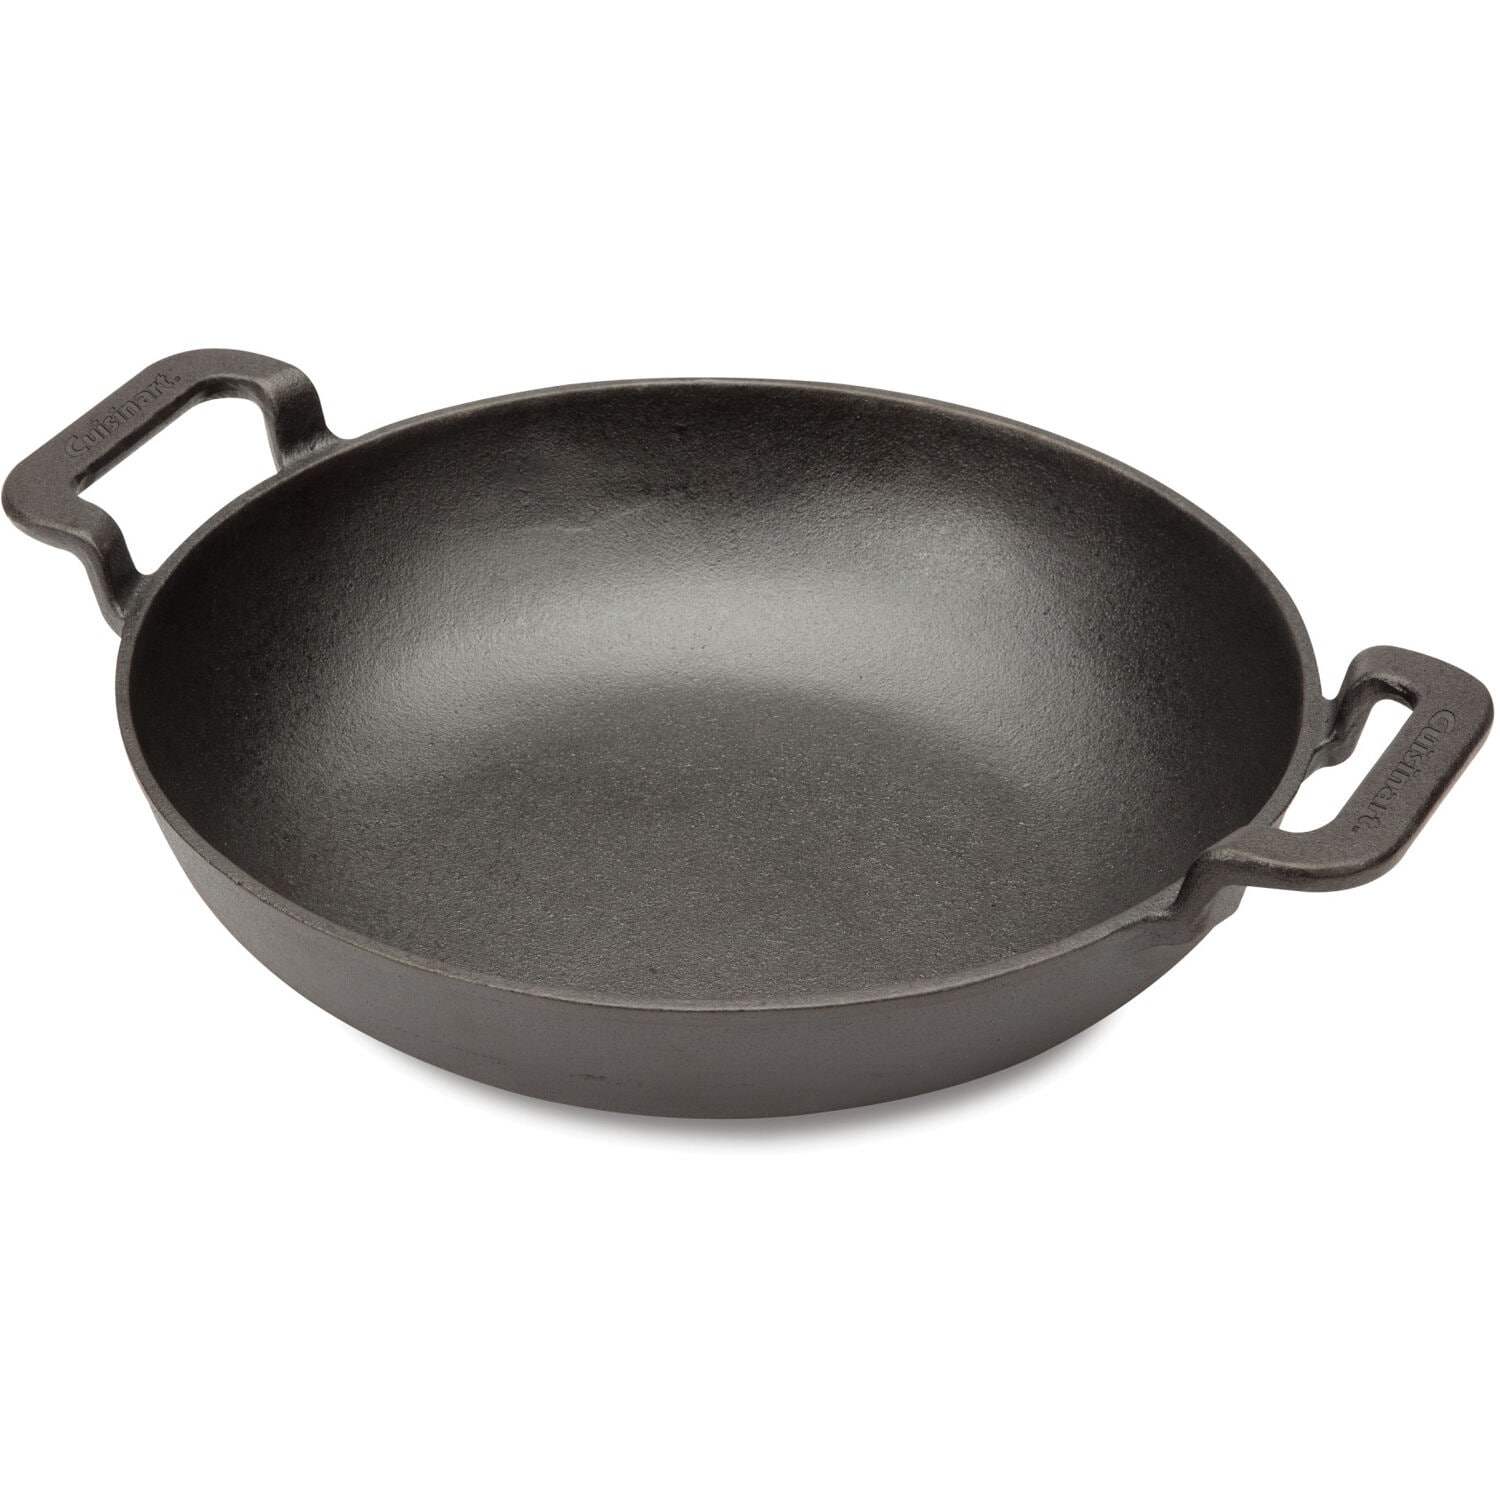 New Pit Boss 14In Cast Iron Dutch Oven, 1 - Fry's Food Stores